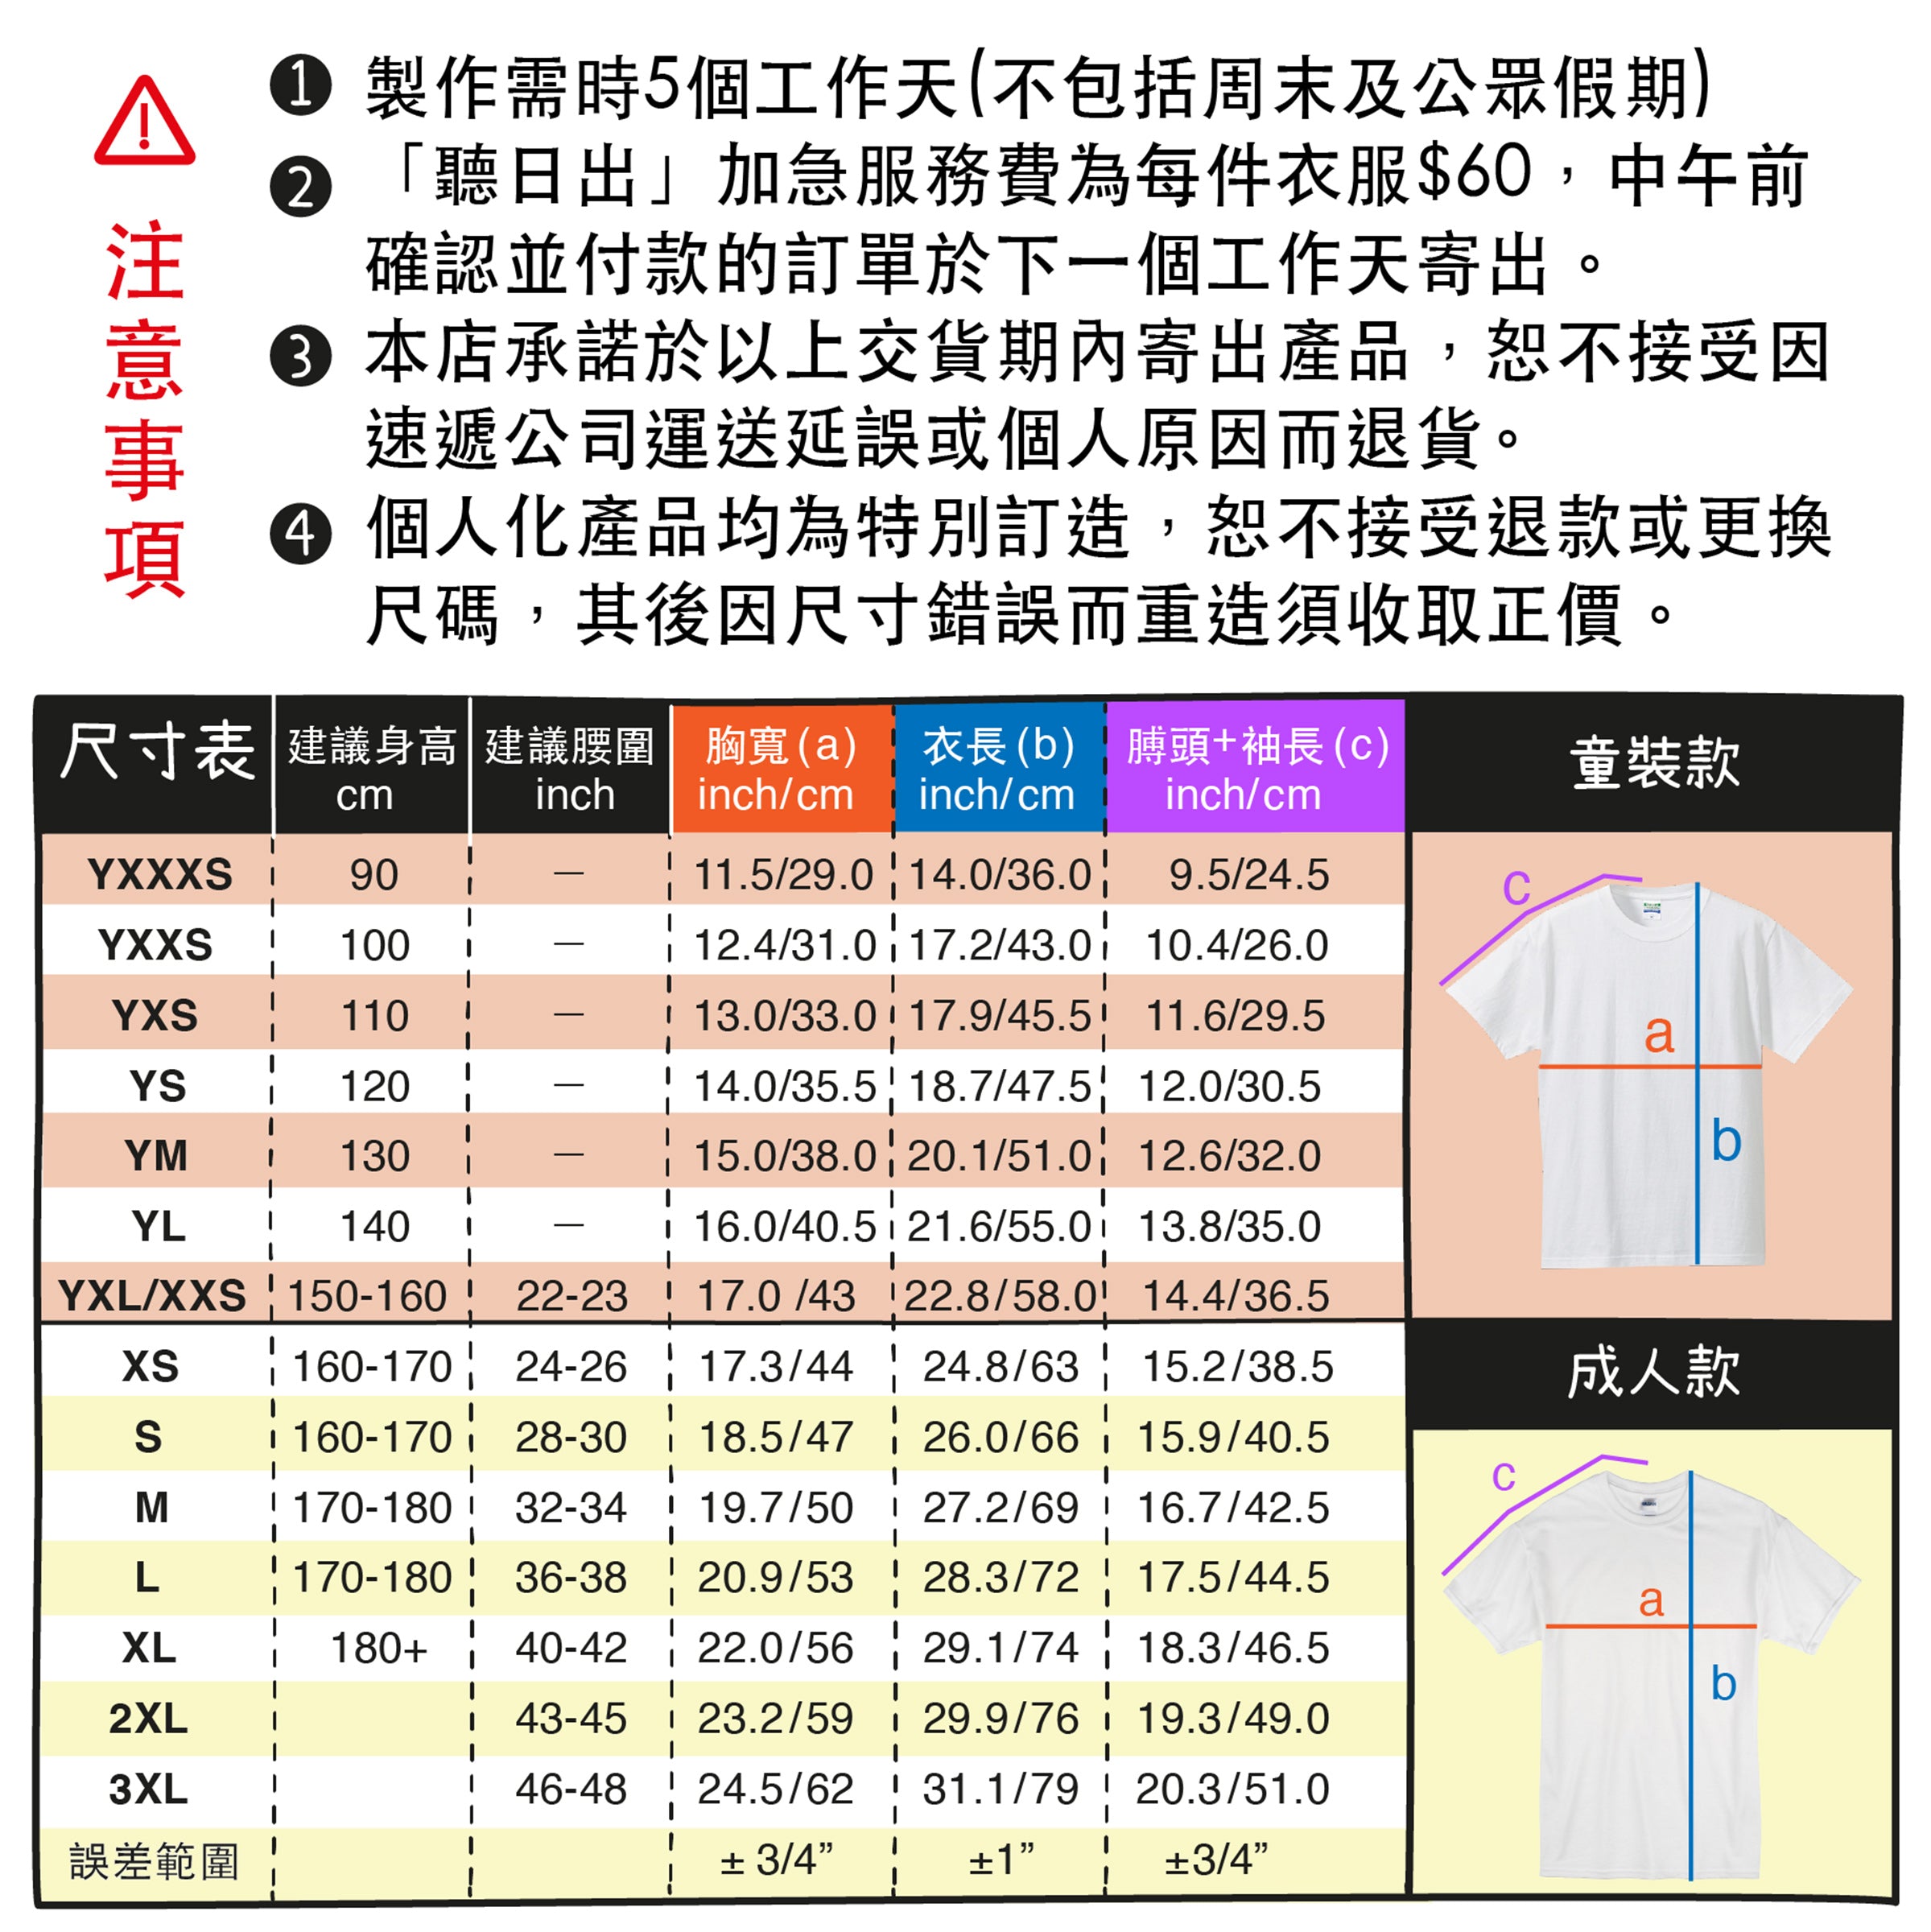 Free Color Matching Couple T-Shirt | 可自由配色情侶T-Shirt LO&VE